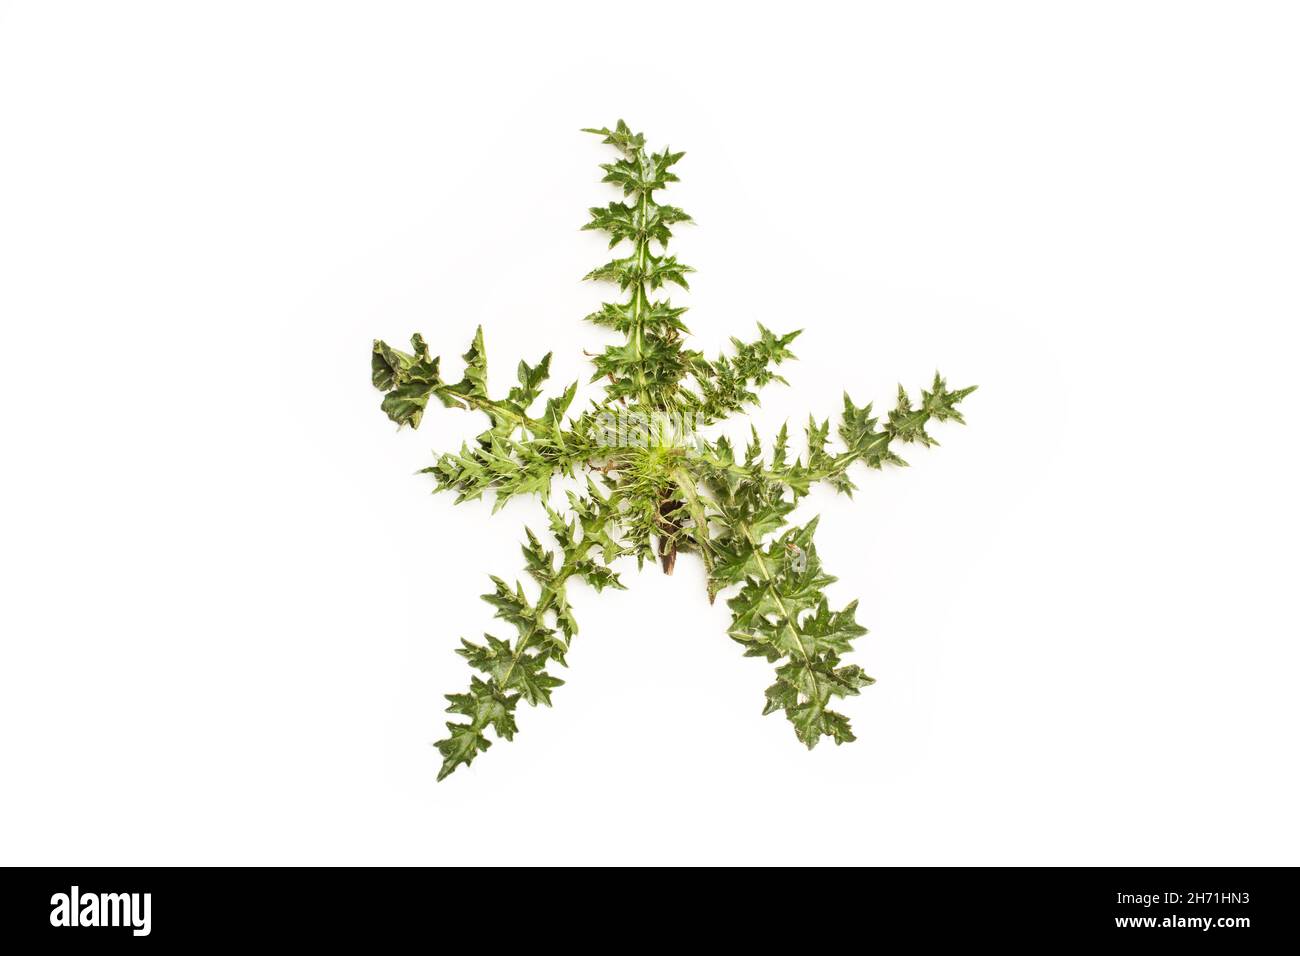 A green thistle on a white background Stock Photo